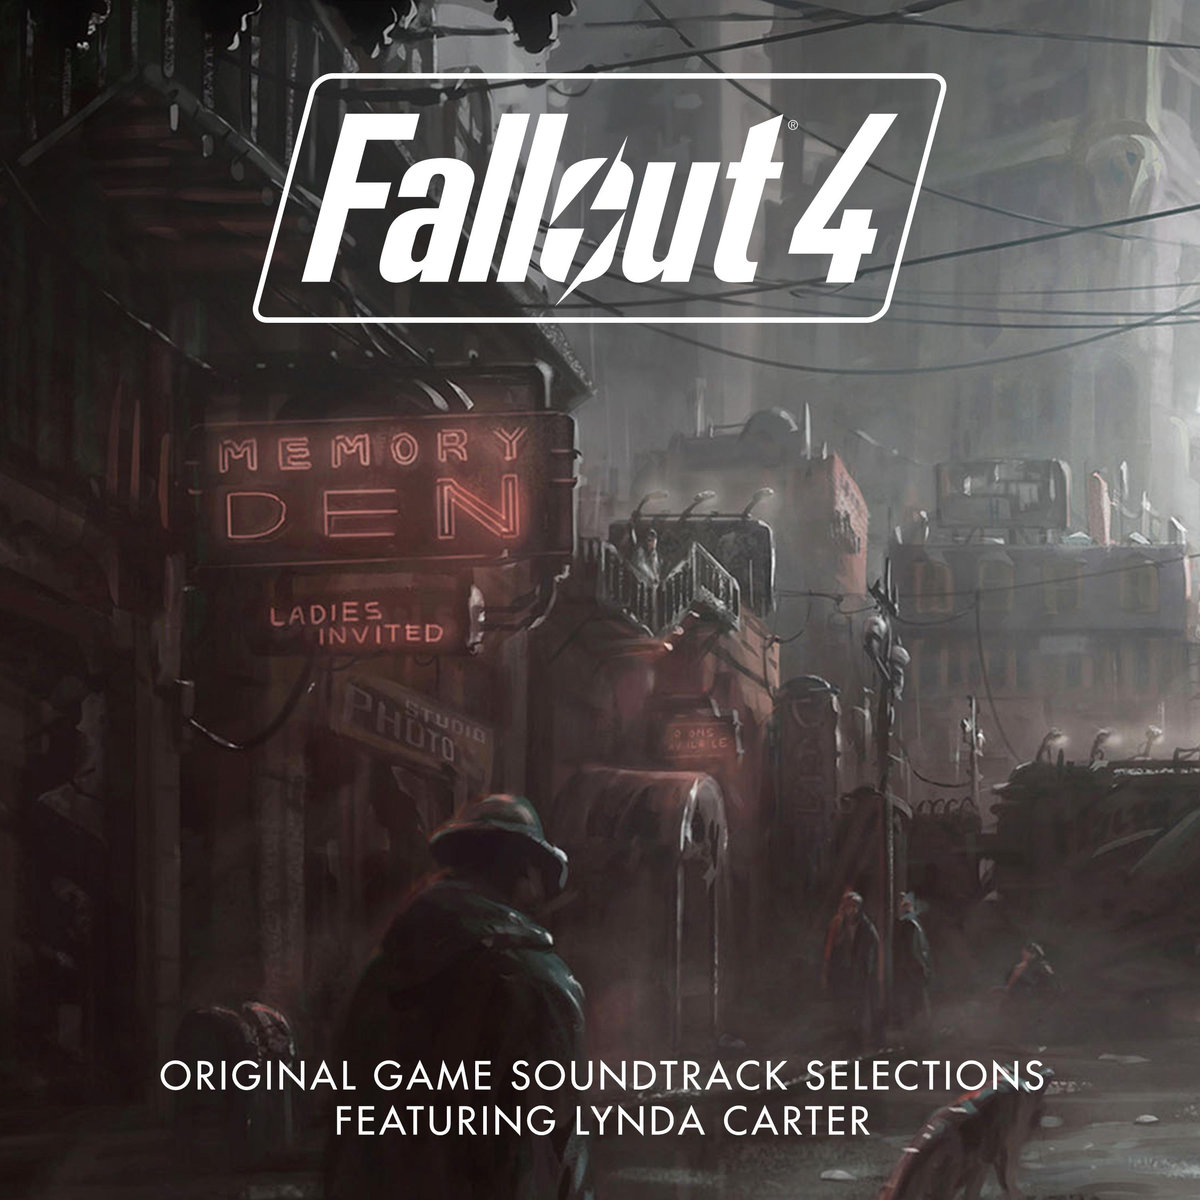 Music for fallout 4 фото 1